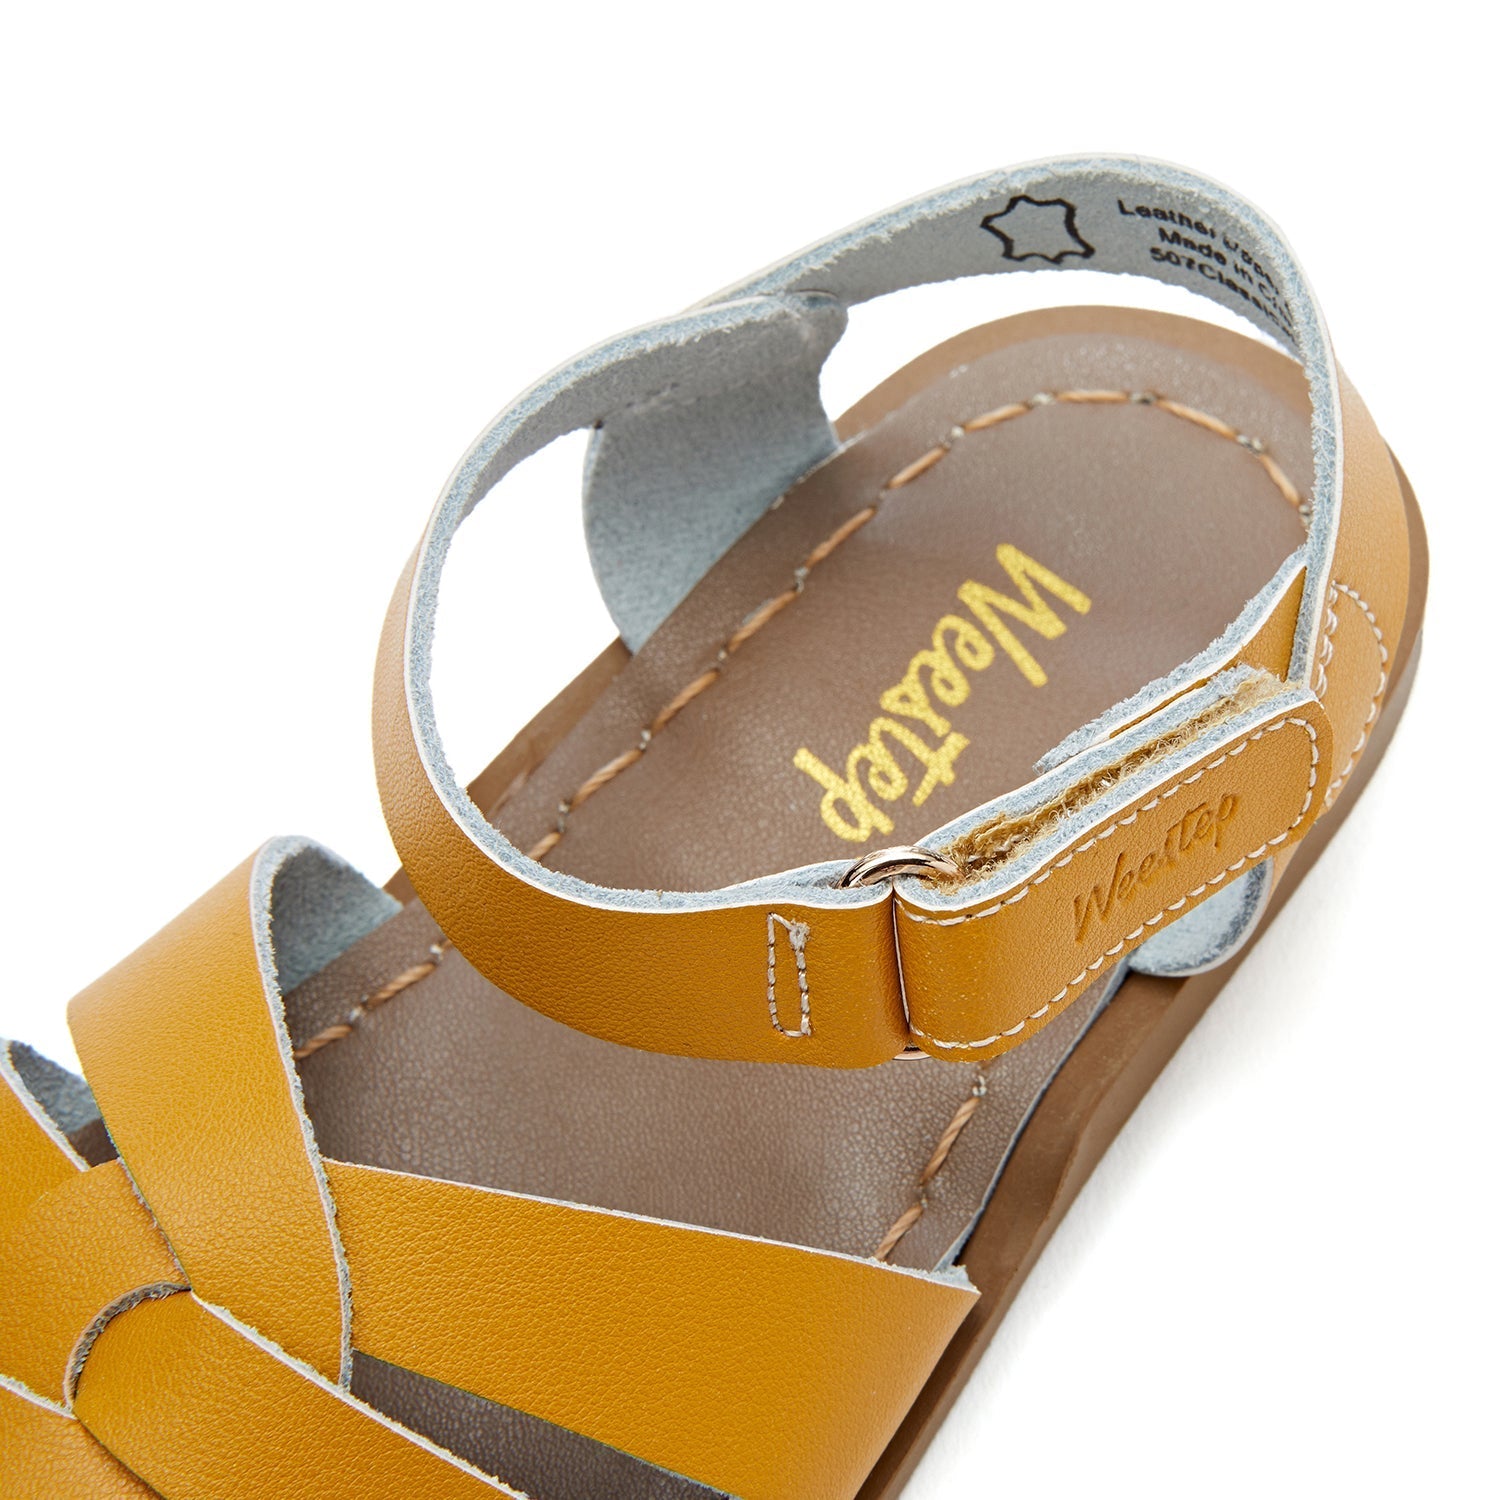 Toddler Classic Leather Sandal